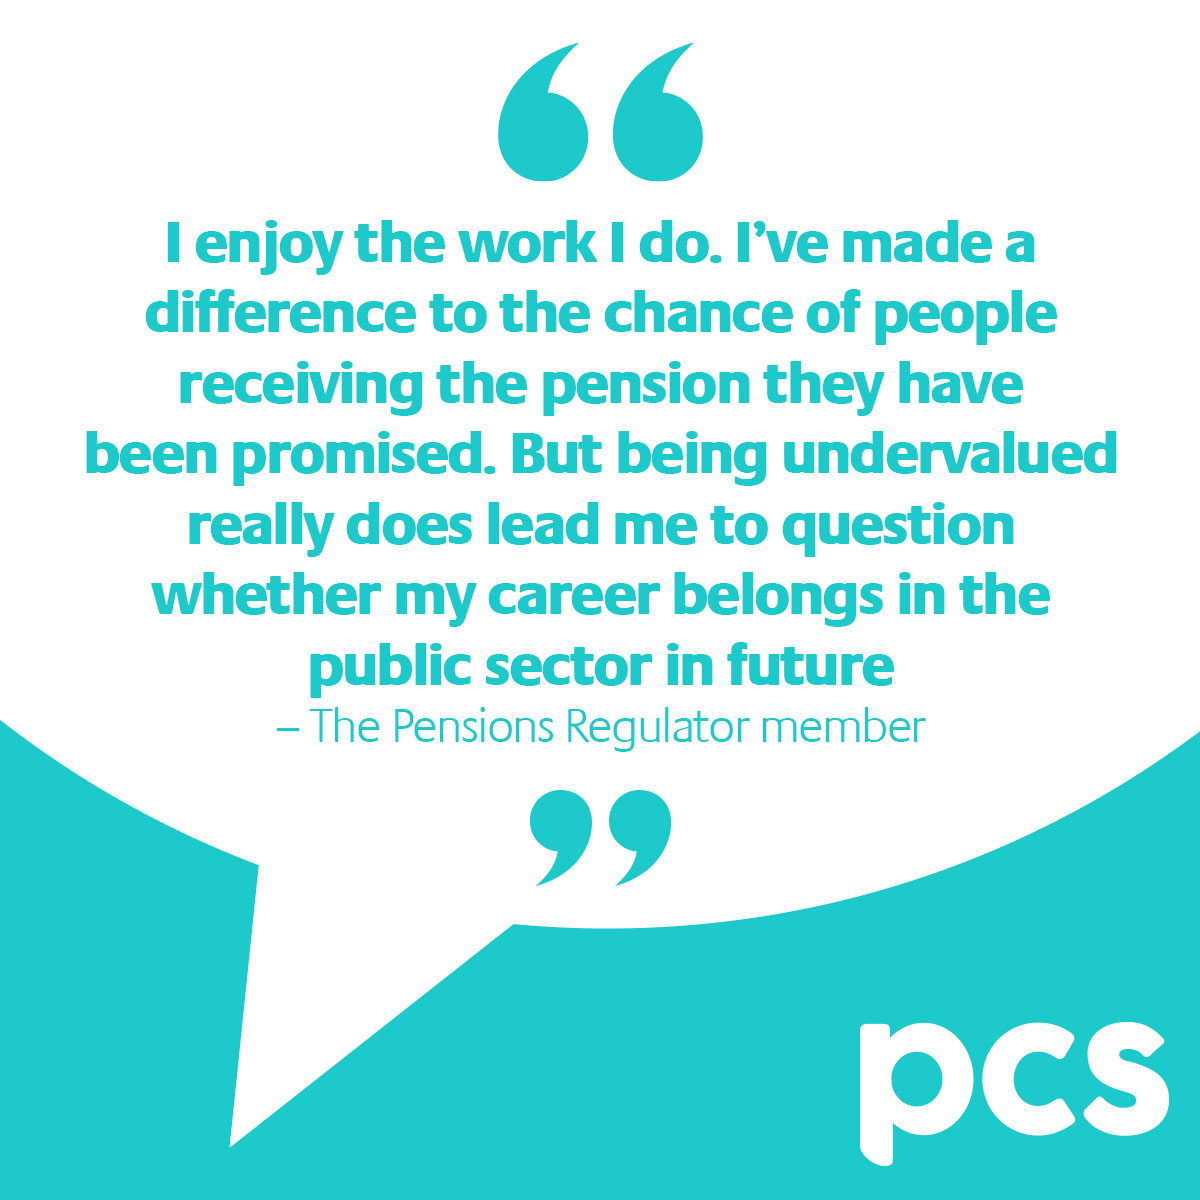 Our members in The Pensions Regulator are furious. Tomorrow on payday, the employer is imposing an unacceptable pay offer during a cost-of-living crisis. Read some eye-opening testimonies from members about the lack of pay rises: pcs.org.uk/news-events/ne… #PCSonStrike